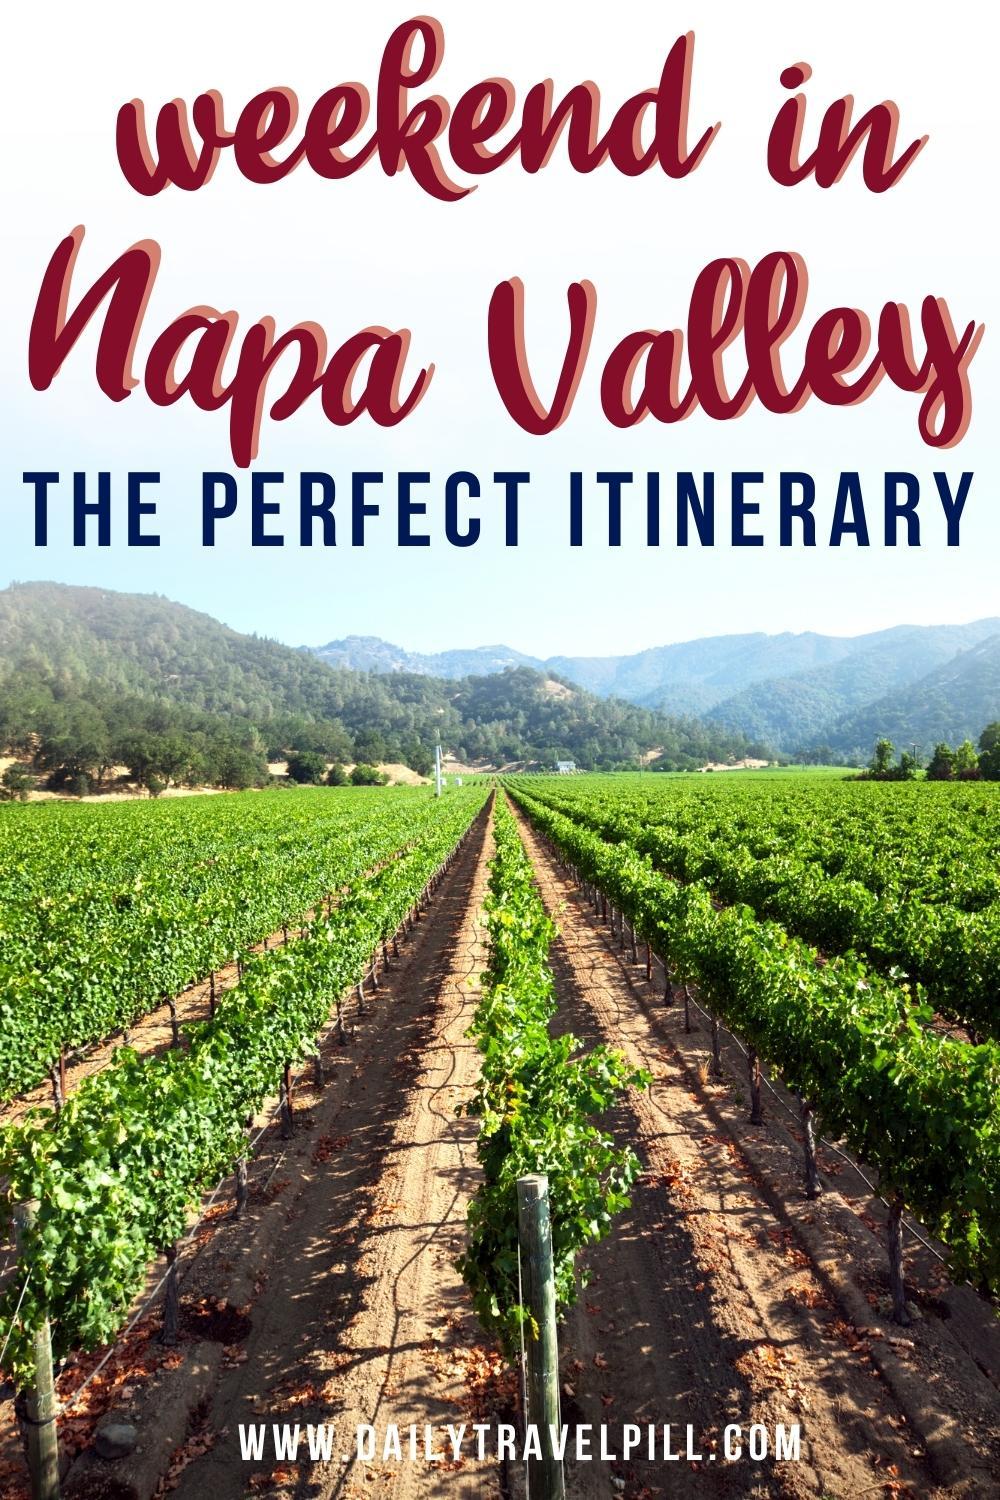 napa valley itinerary, weekend in napa valley, 2 days in napa valley itinerary, napa valley in two days